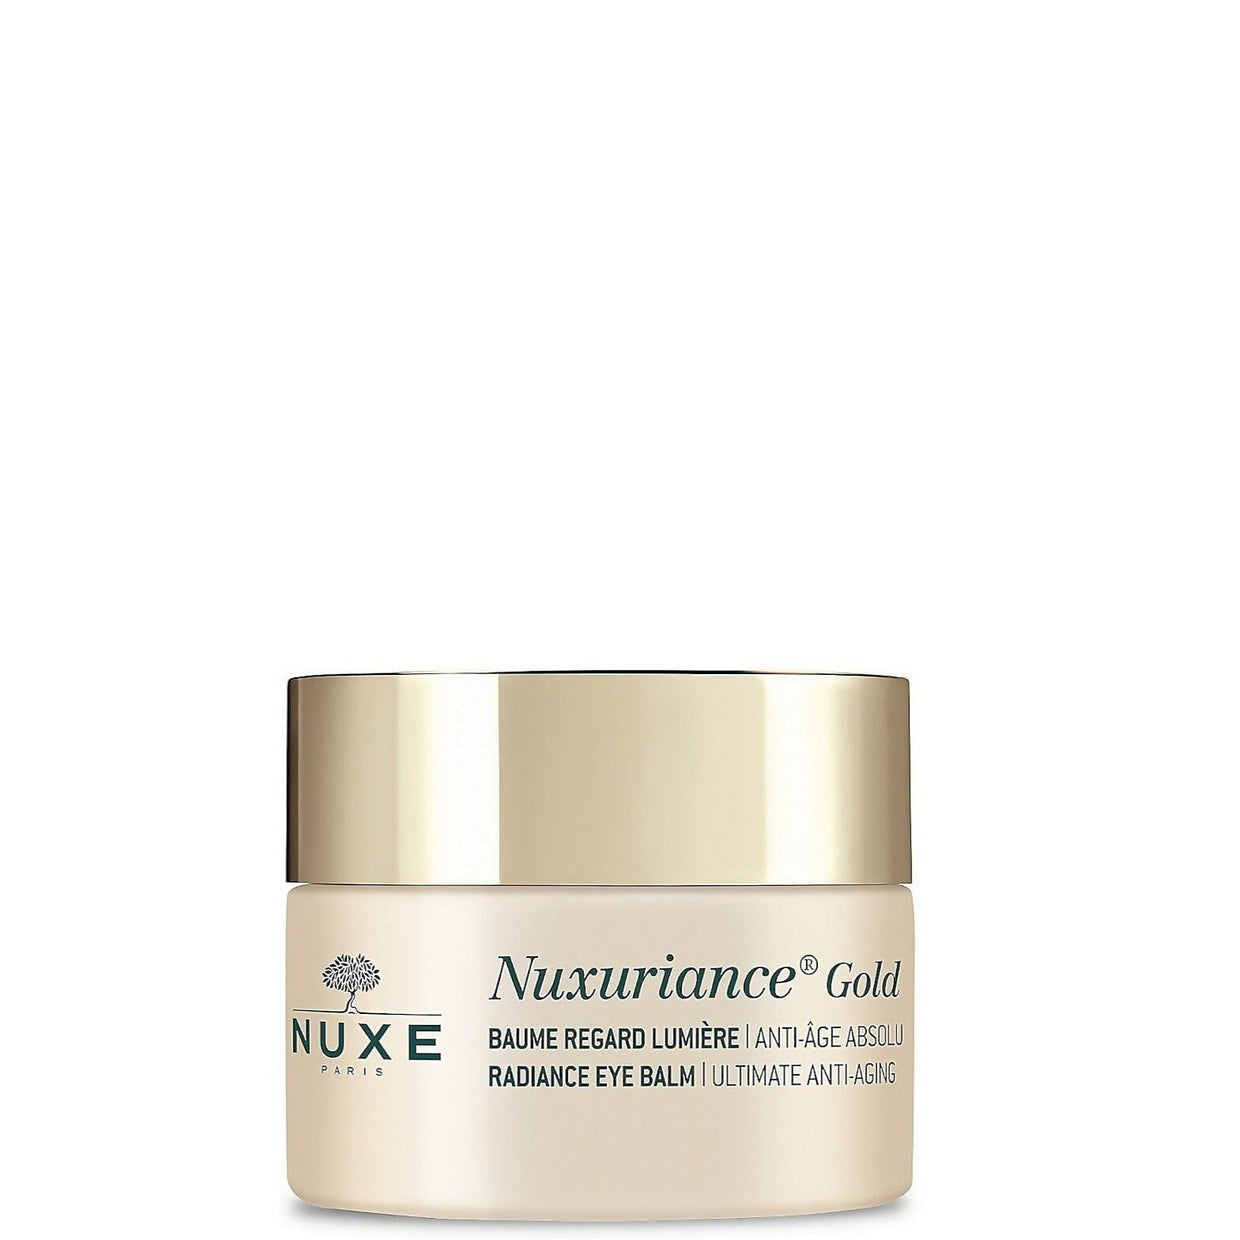 Nuxe Nuxuriance Gold Radiance Eye Balm Nuxe 15 ml Shop at Exclusive Beauty Club